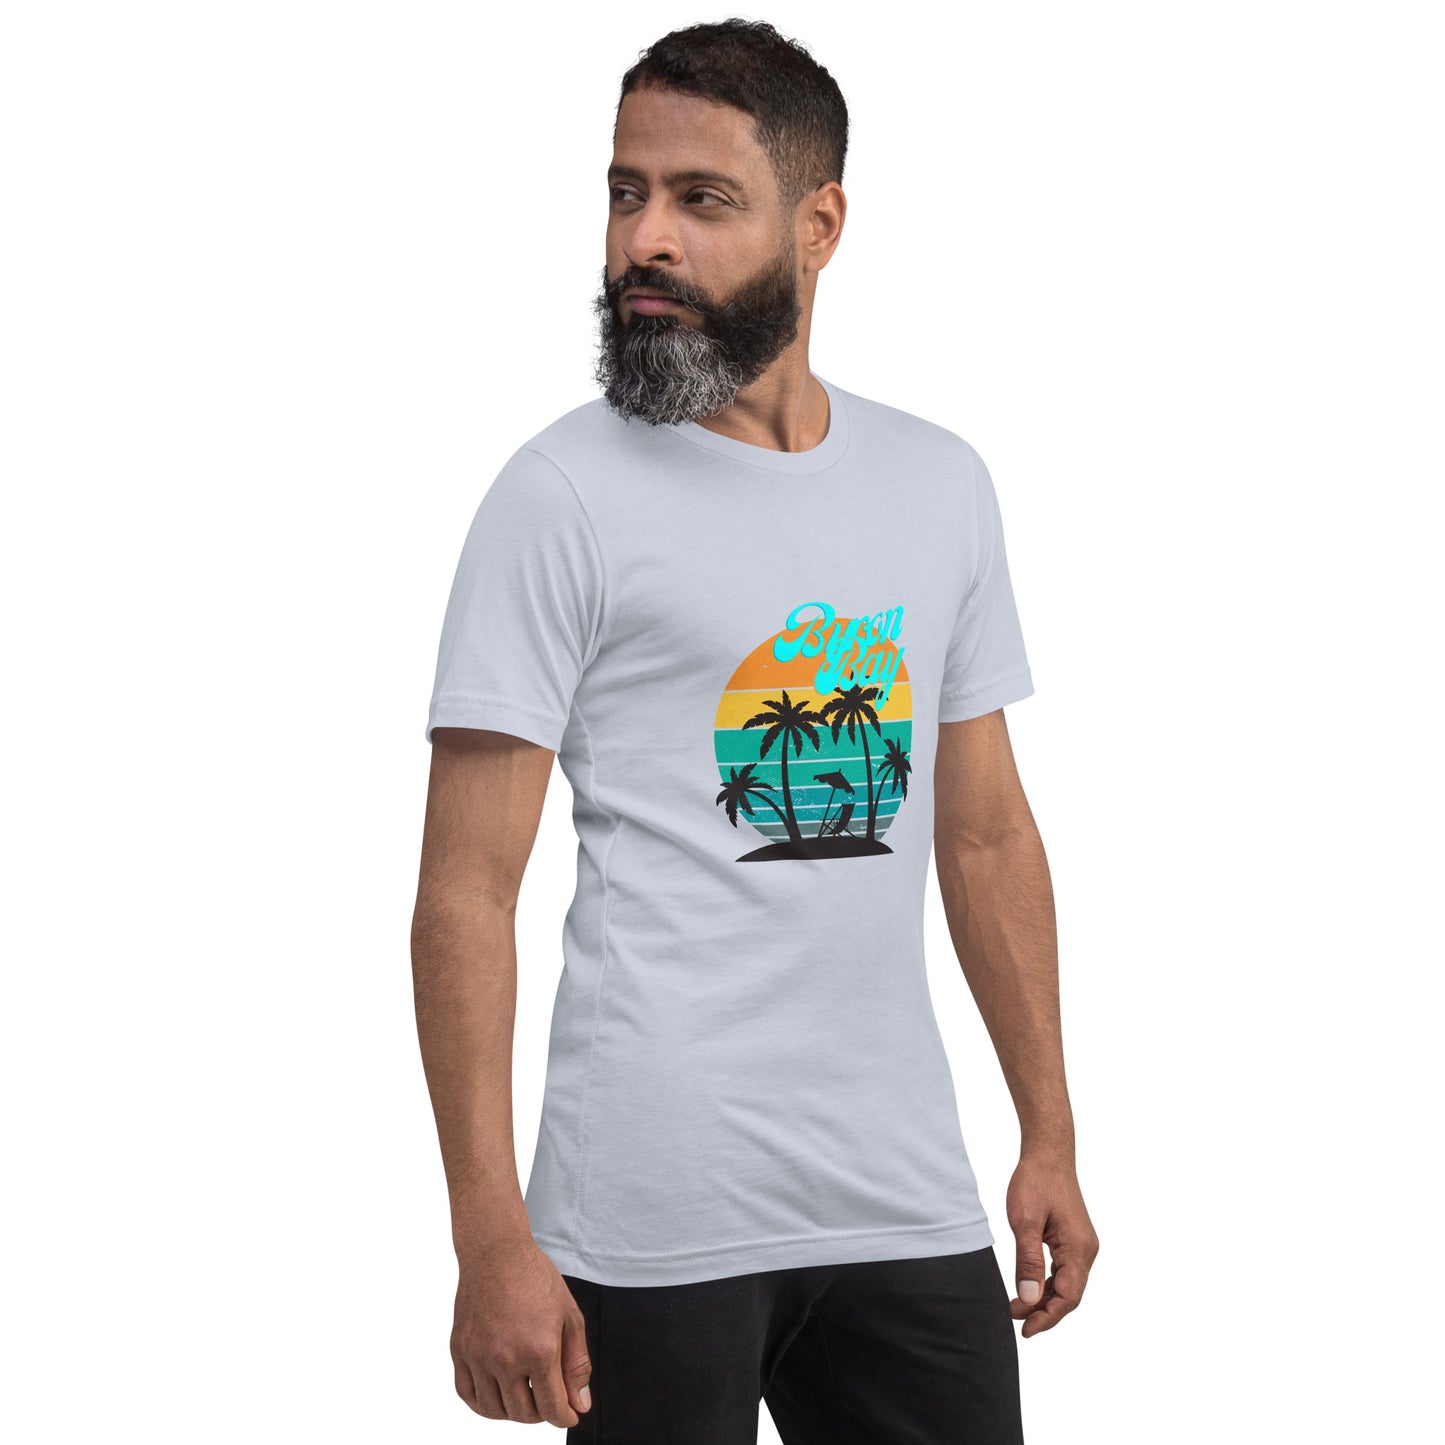  Unisex T-Shirt - light blue - Front view, on man standing with arms by side - Byron Bay design on front - Genuine Byron Bay Merchandise | Produced by Go Sea Kayak Byron Bay 